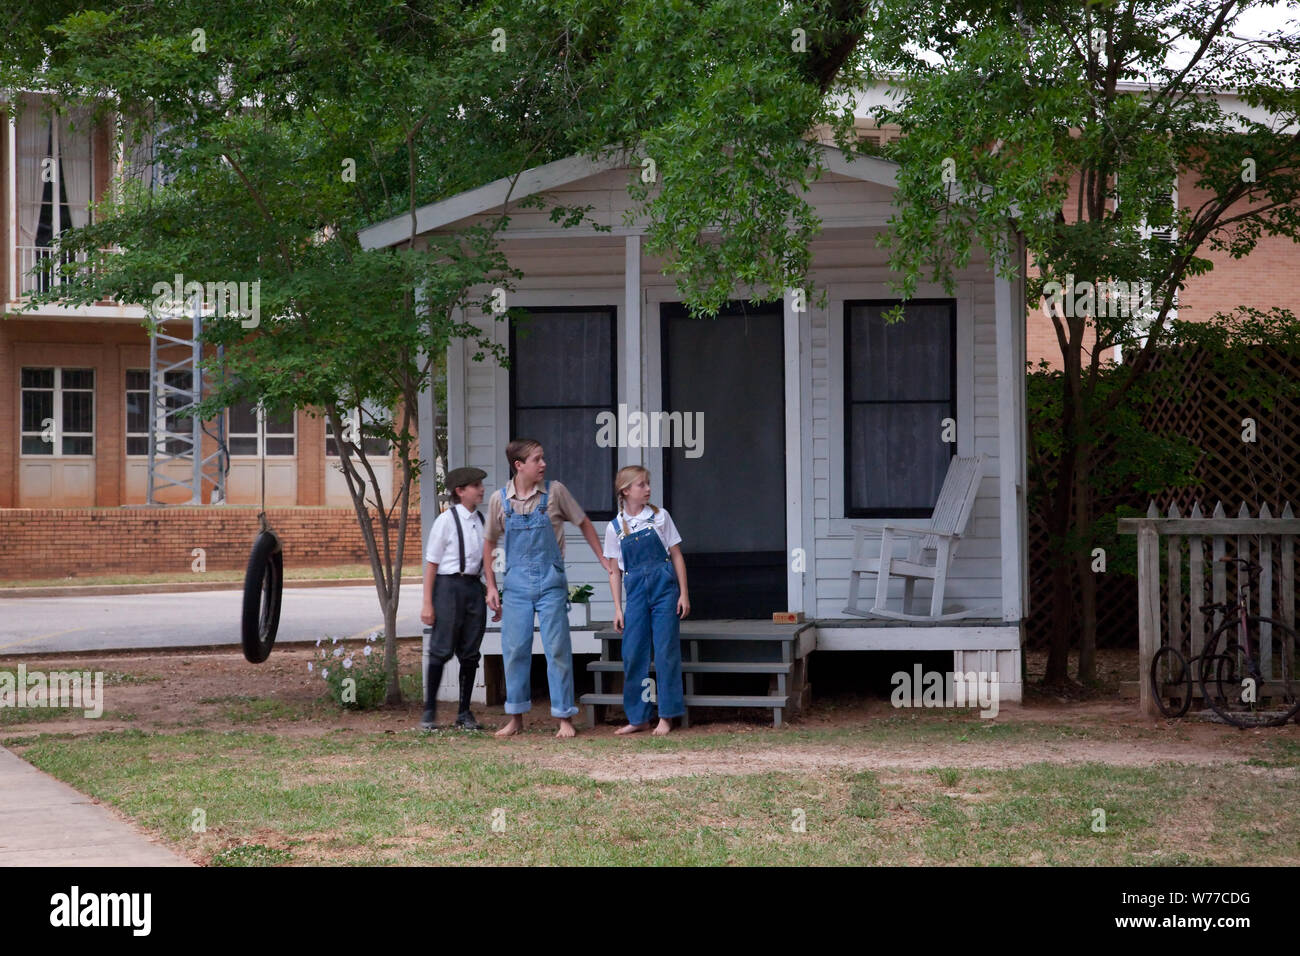 A scene from the play To Kill A Mockingbird, performed in Monroeville, Alabama Physical description: 1 photograph : digital, TIFF file, color.  Notes: This special presentation commemorates the 50th anniversary of the best-selling, Pulitzer Prize-winning novel by Harper Lee, a native of Monroeville, Alabama. Many literary scholars and local residents believe some of Ms. Lee's childhood acquaintances served as models for the personalities in the revered book concerning the struggle against racial injustice in the South during the 1930s.; Gift; George F. Landegger; 2010; (DLC/PP-2010:090).; Form Stock Photo